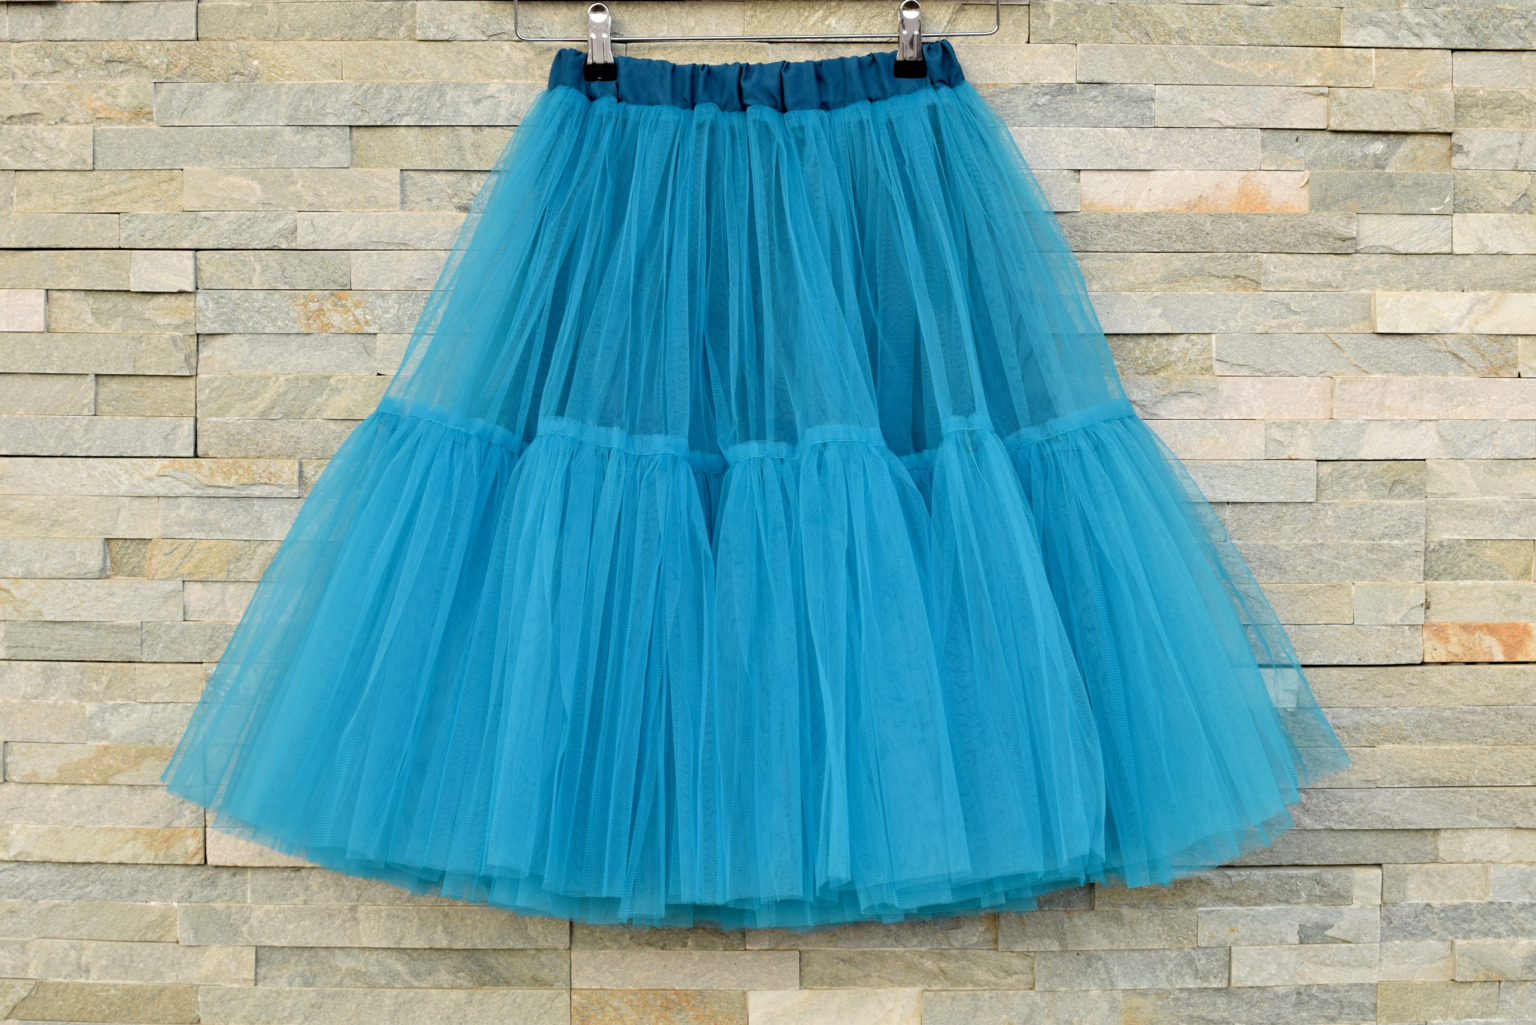 How To Make A Tiered Tulle Skirt Tutorial I Can Sew This 4491